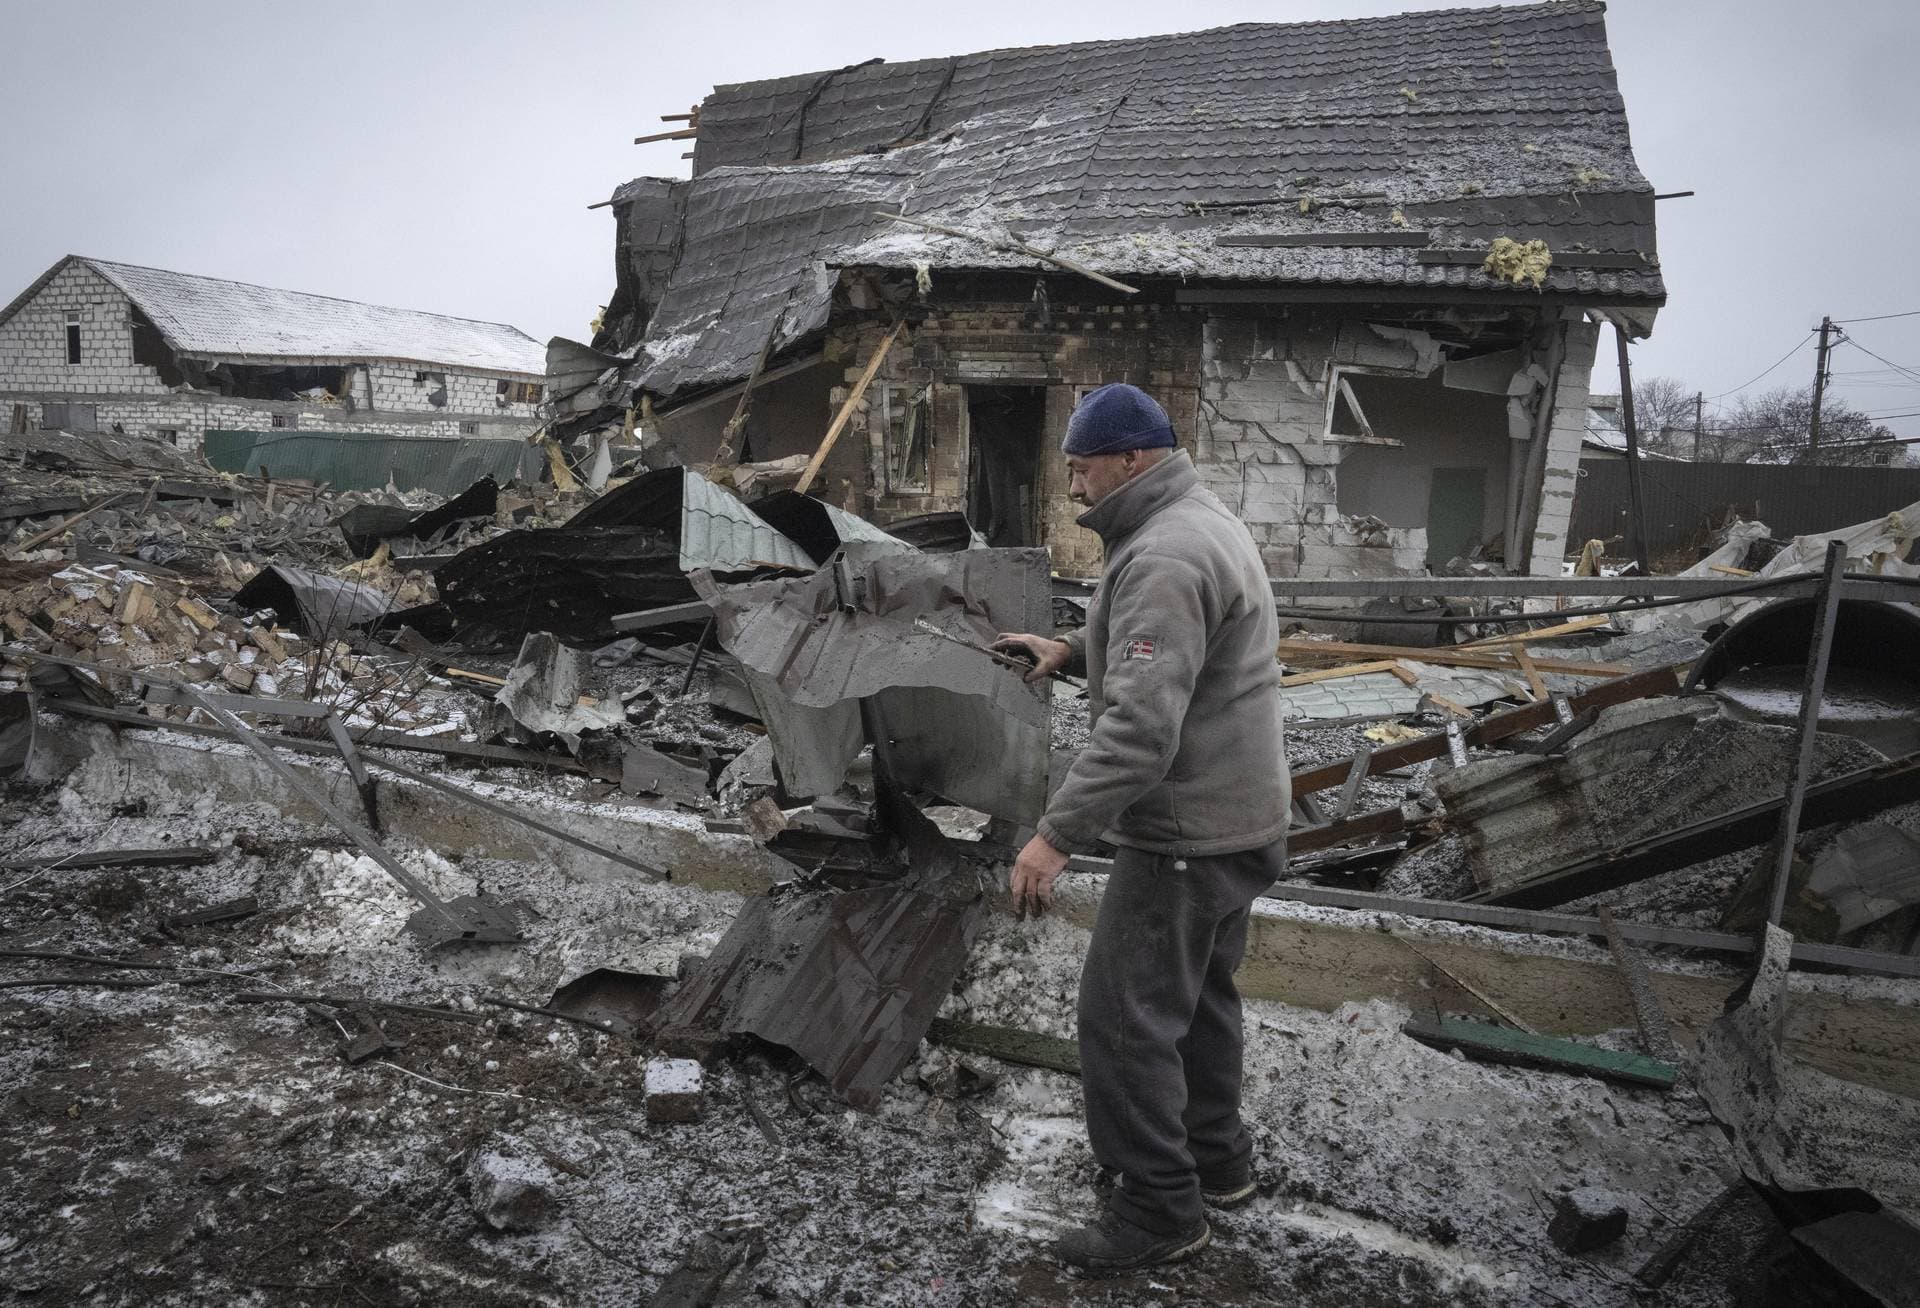 A local resident sorts out debris at the site of a private house ruined in the Russian missile attack in Kyiv